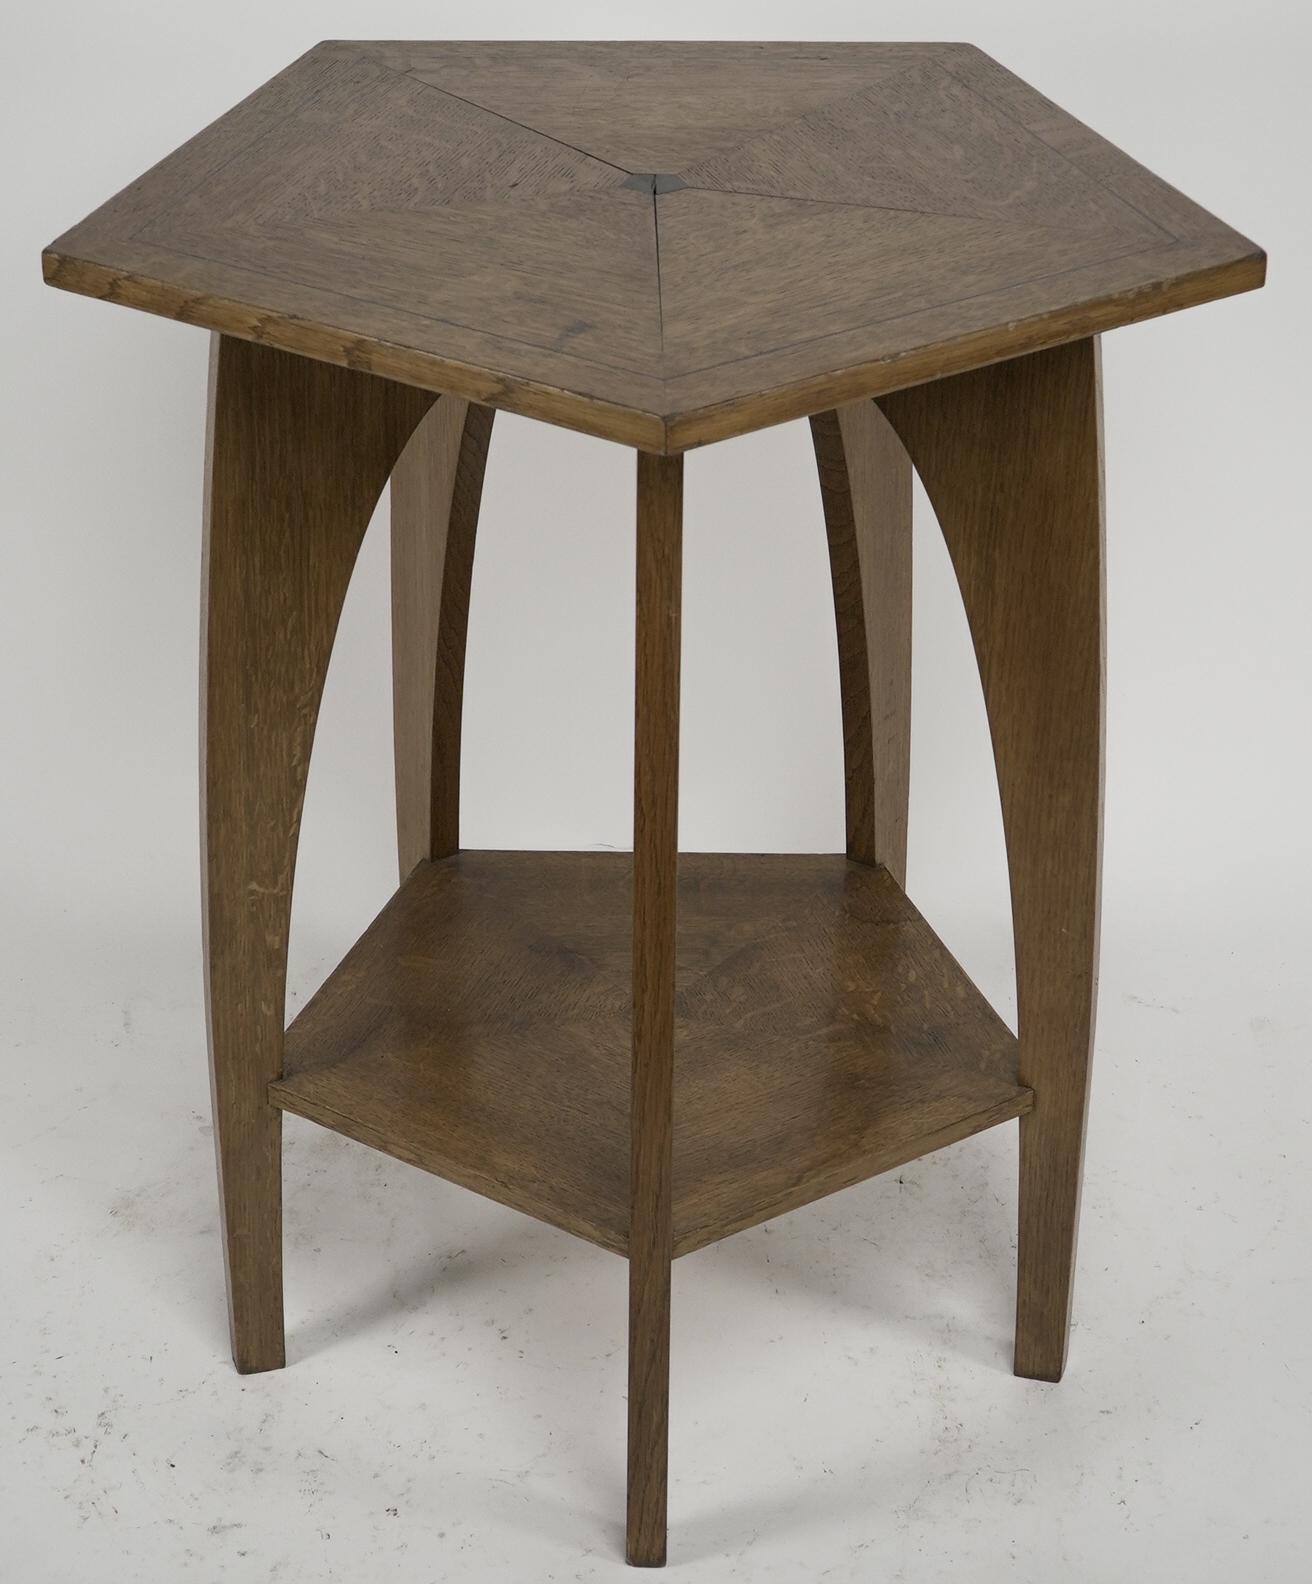 A modern craftsman made Arts and Crafts oak pentagonal centre table with a triangular segmented top inlaid with Walnut to the centre, with five arched legs uniting the lower shelf.
